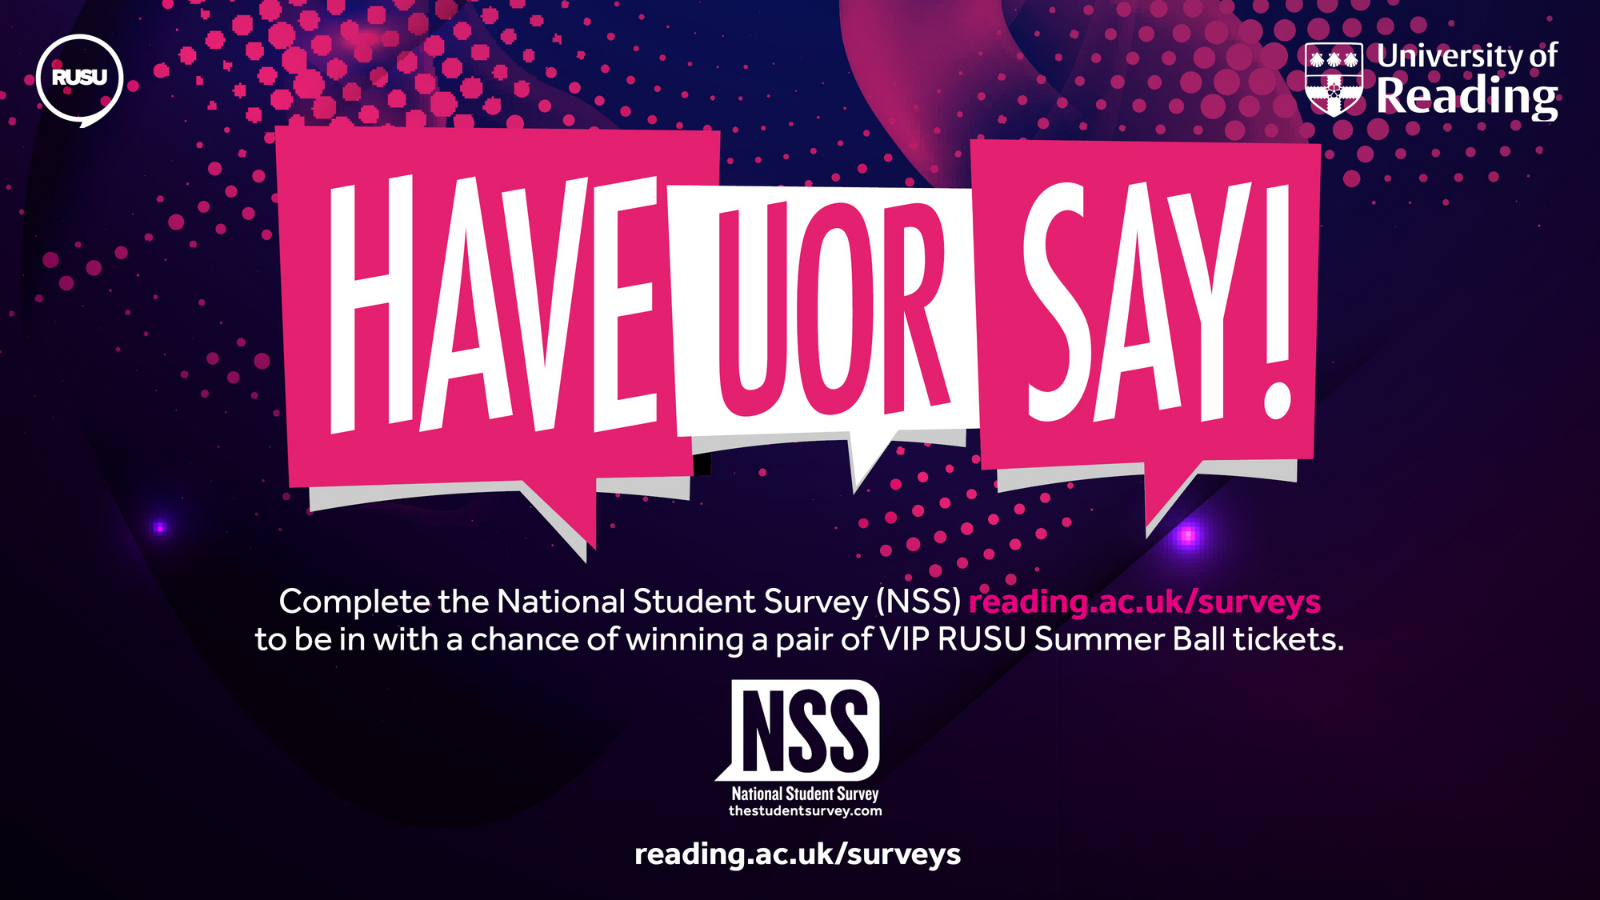 'Have UoR Say National Student Survey' opening banner